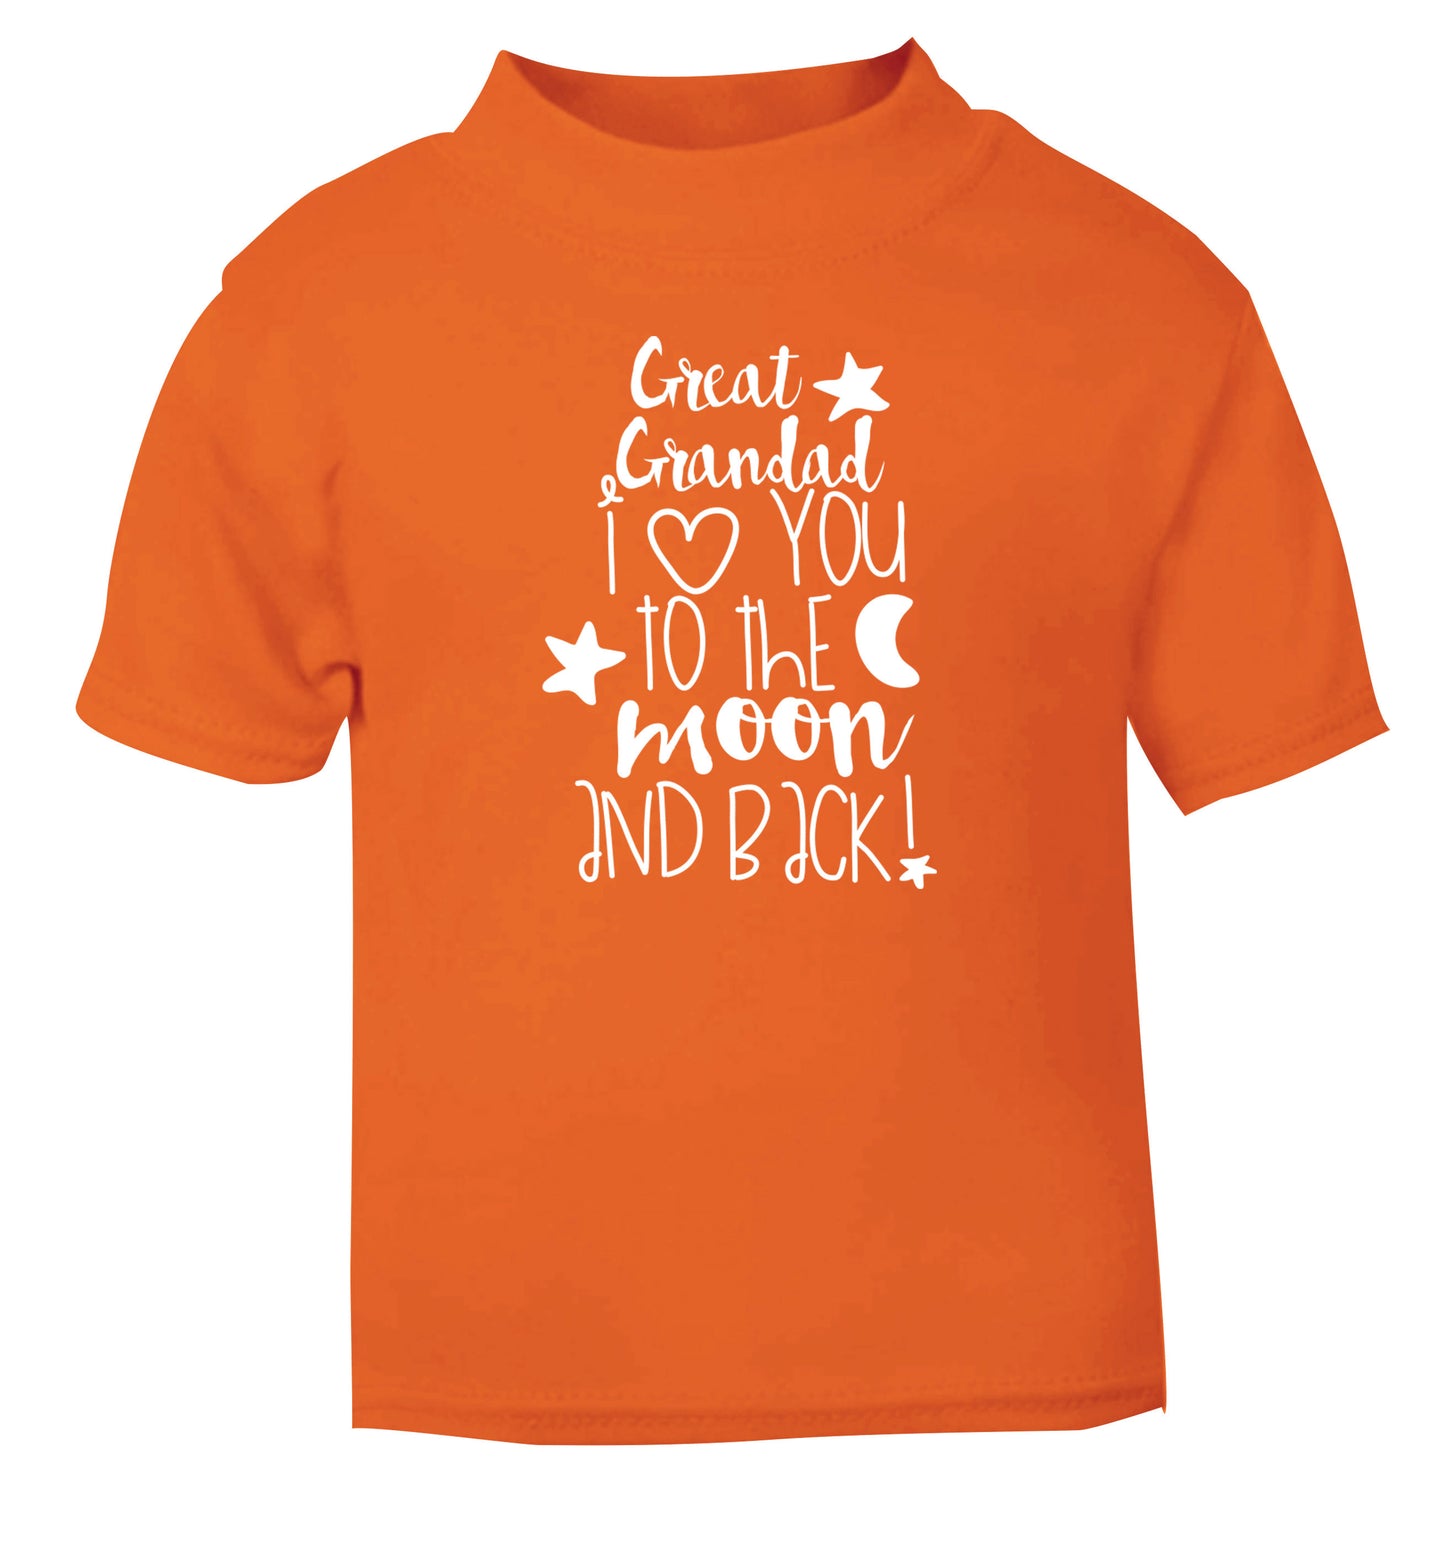 Great Grandad I love you to the moon and back orange Baby Toddler Tshirt 2 Years